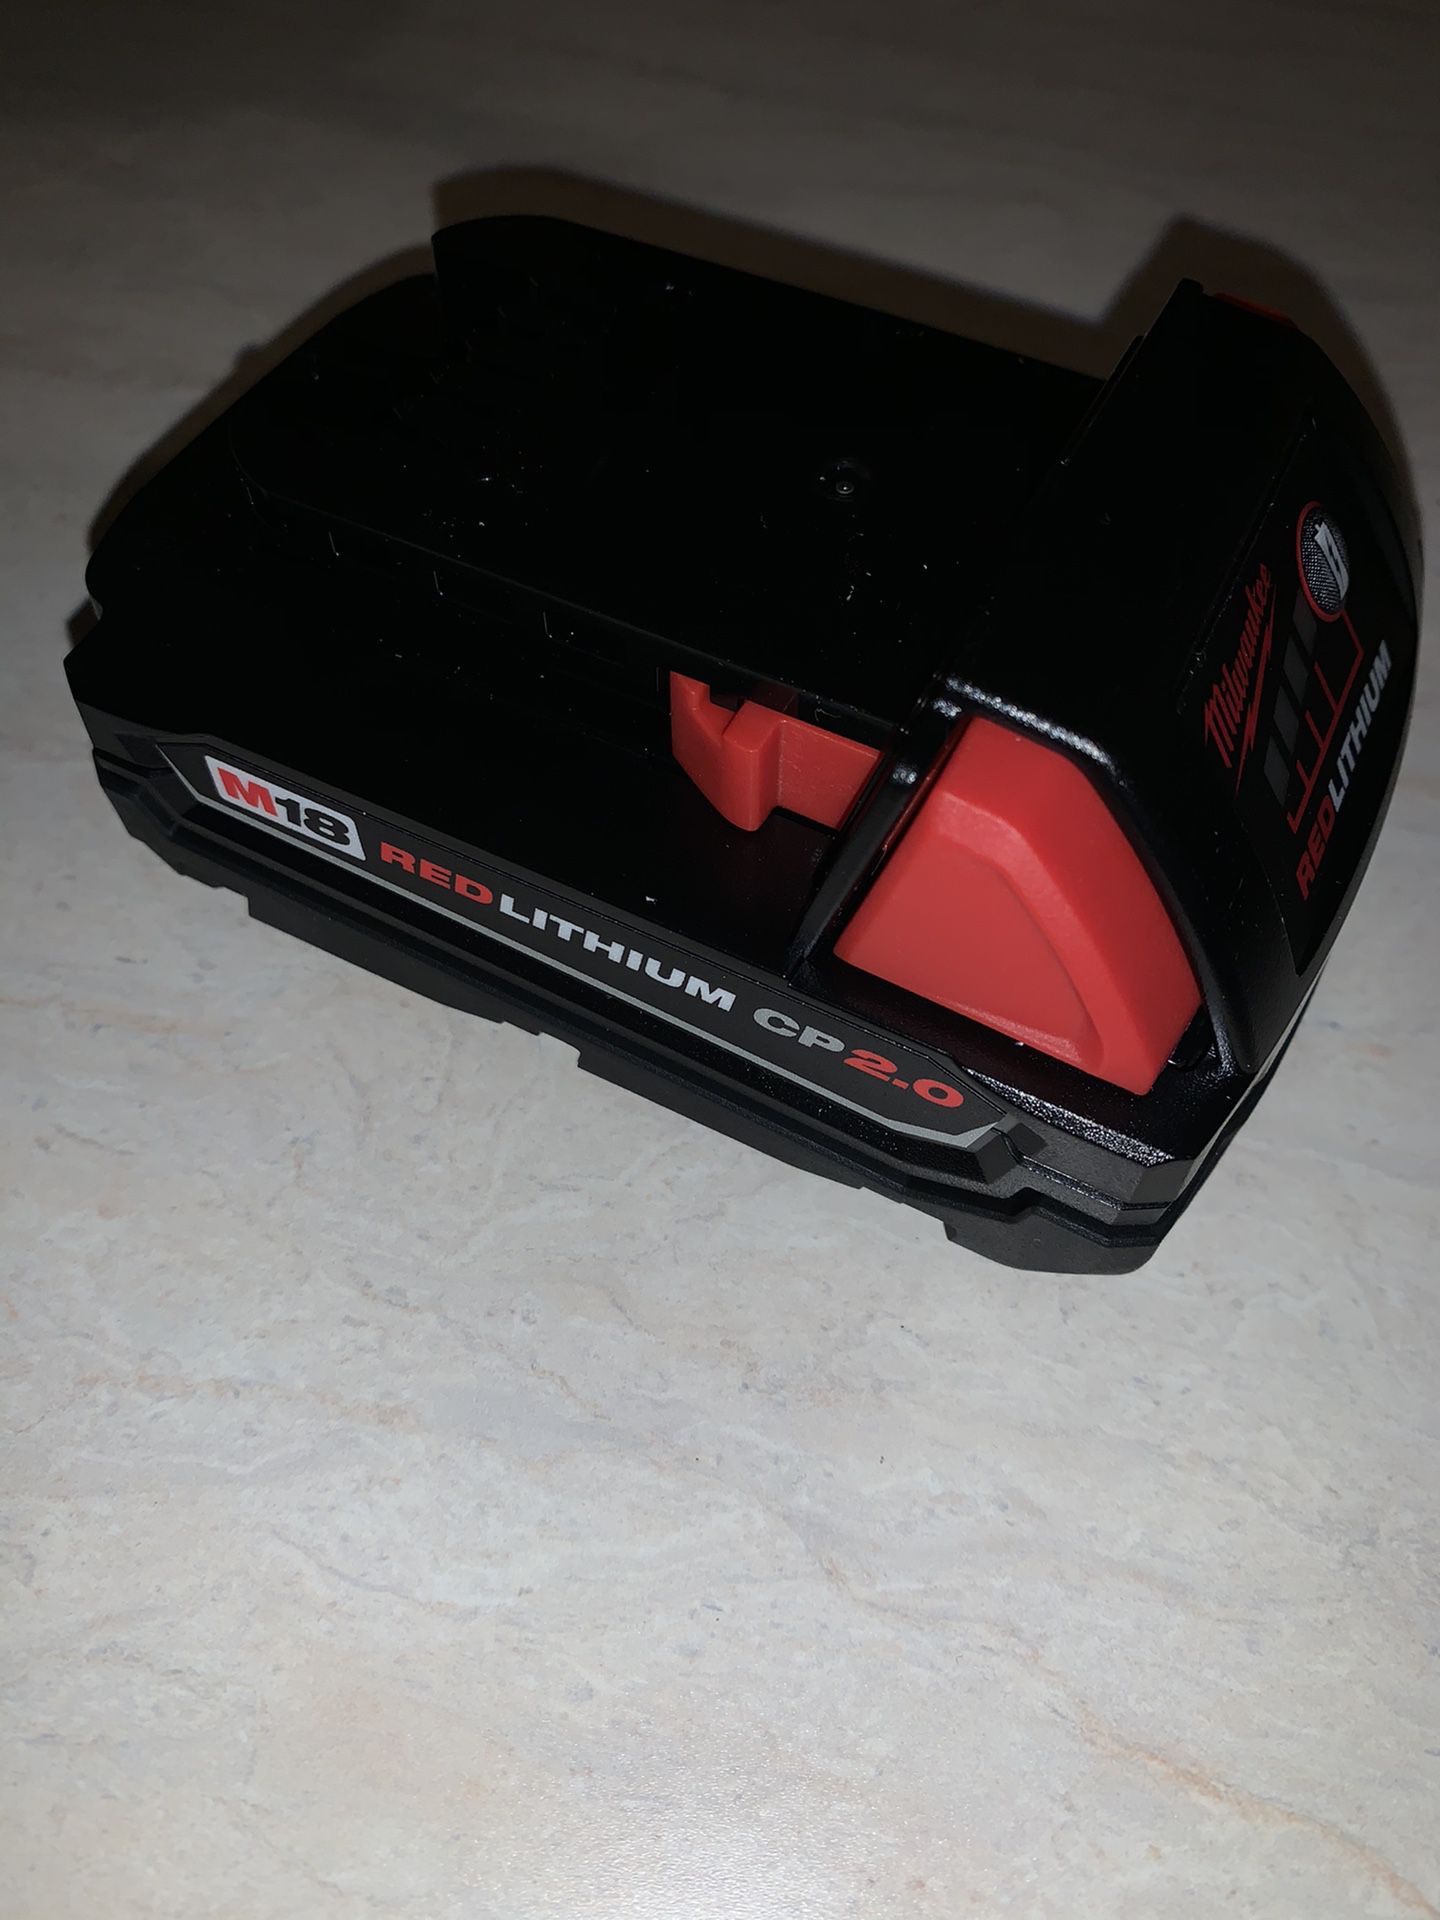 Milwaukee 2.0 battery. $35 price is firm